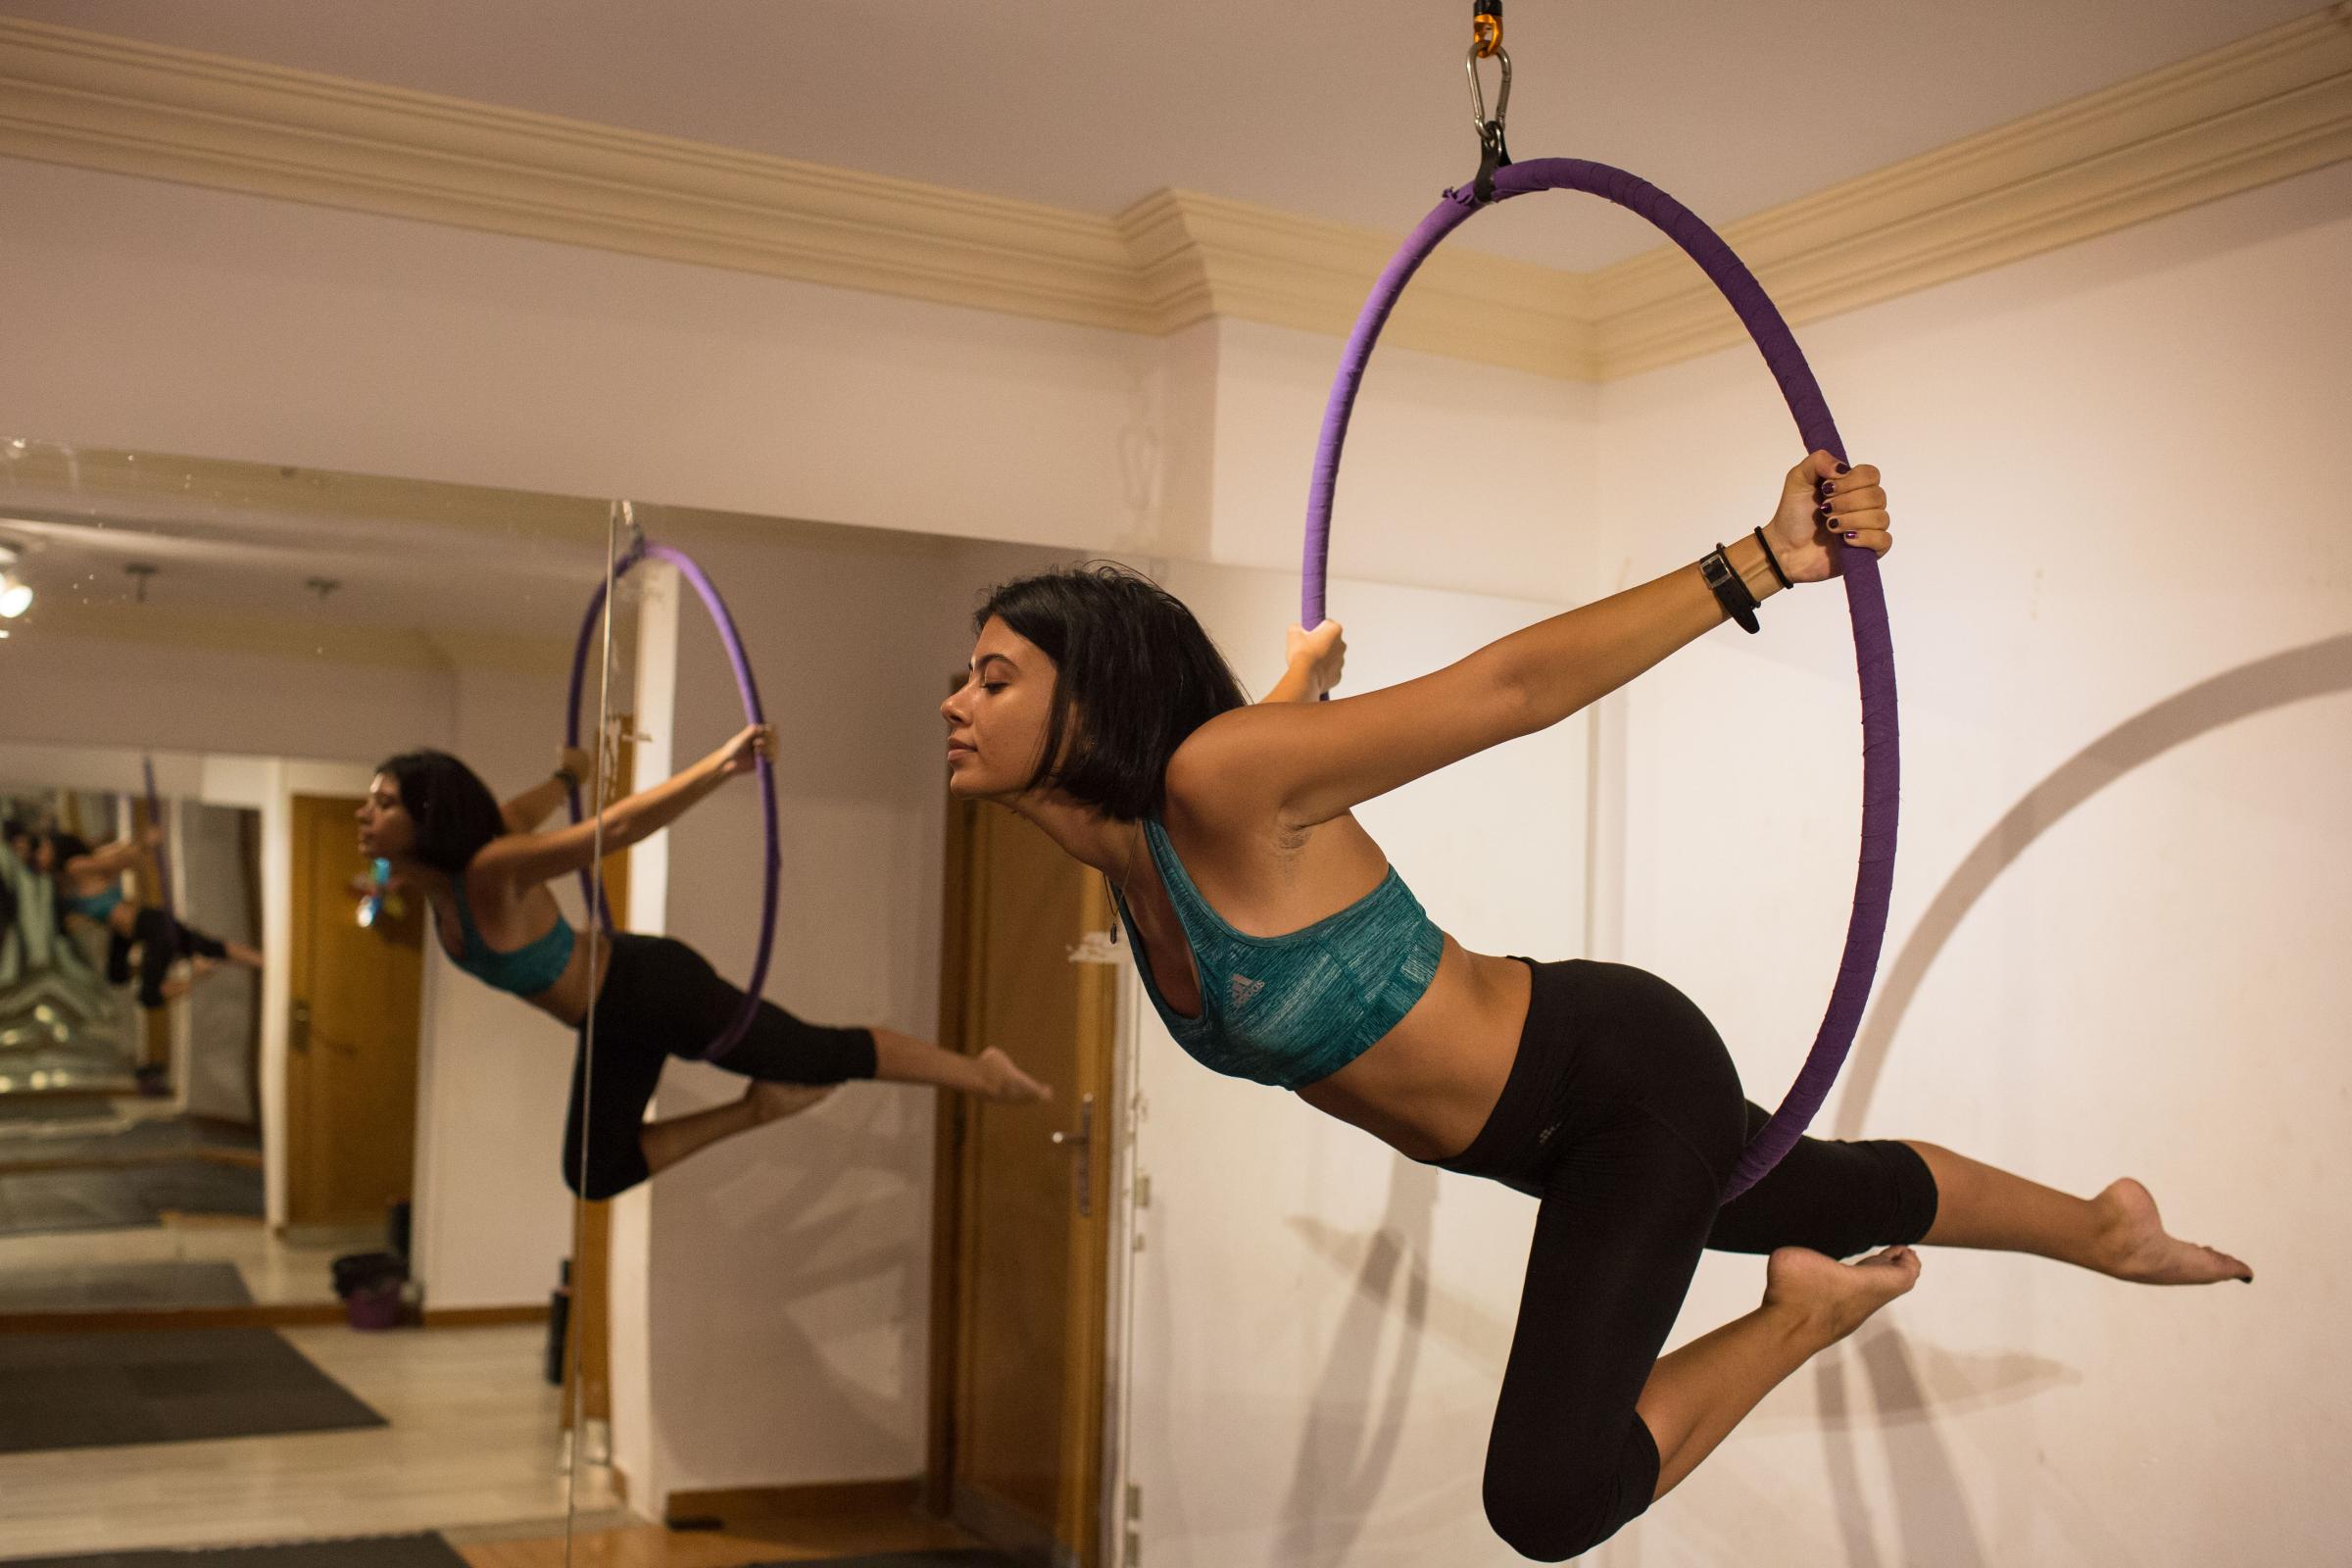 Yasmine Hossam, 21, pharmacy student Yasmine started practicing pole fitness a year ago after encouragement from some of her friends at first....